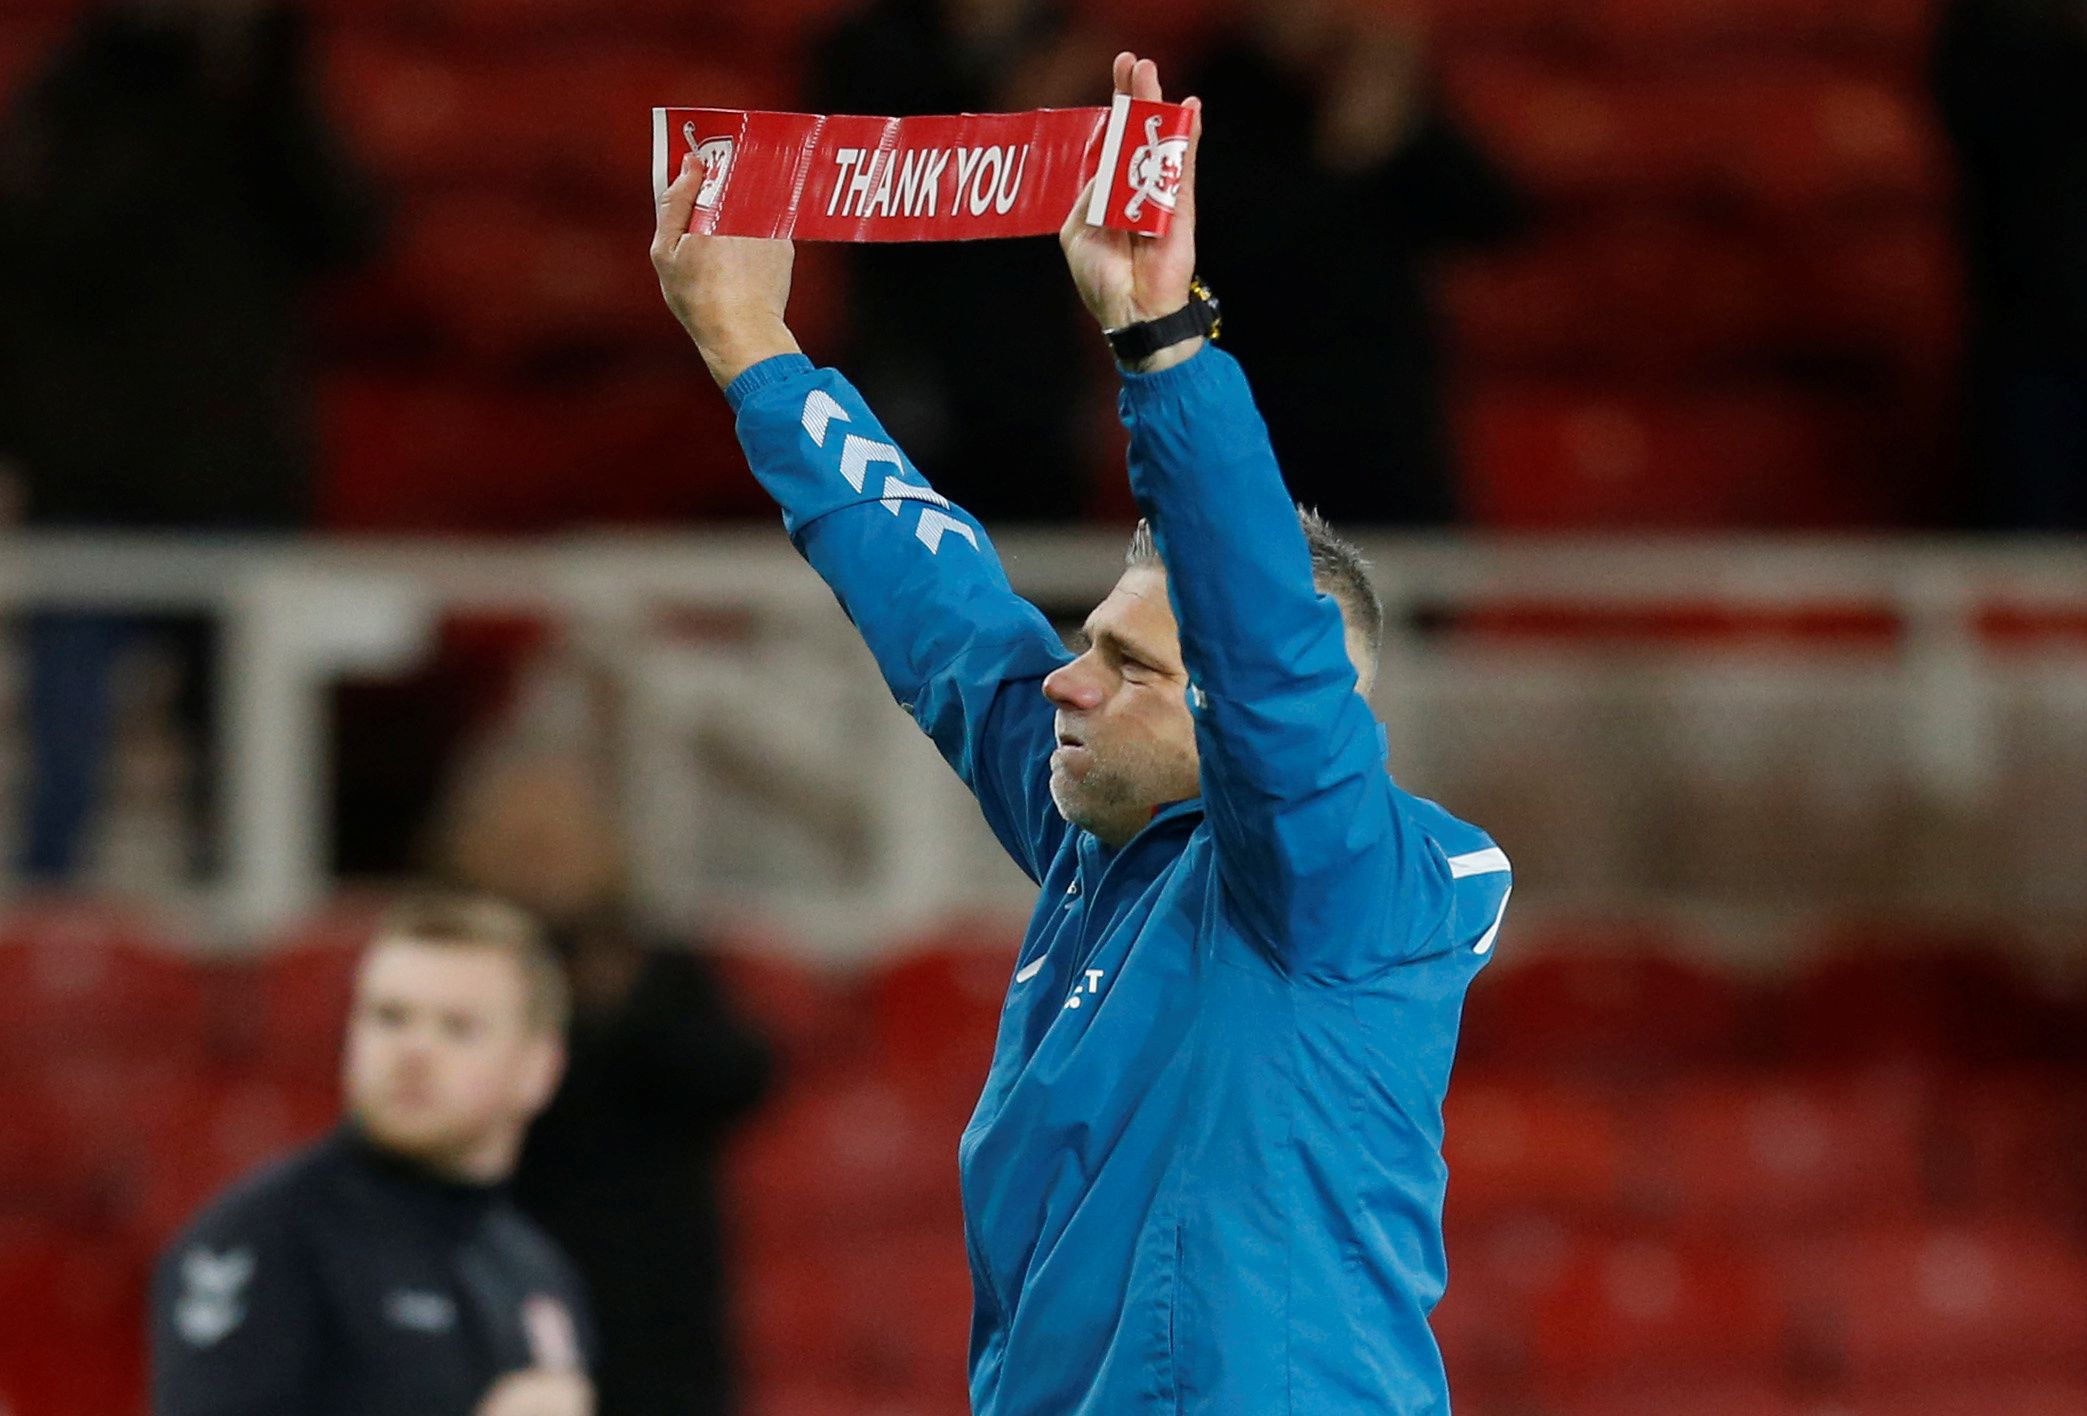 Soccer Football - Championship - Middlesbrough v Stoke City - Riverside Stadium, Middlesbrough, Britain - December 20, 2019  Middlesbrough coach Leo Percovich holds up a banner after the match  Action Images/Ed Sykes  EDITORIAL USE ONLY. No use with unauthorized audio, video, data, fixture lists, club/league logos or 